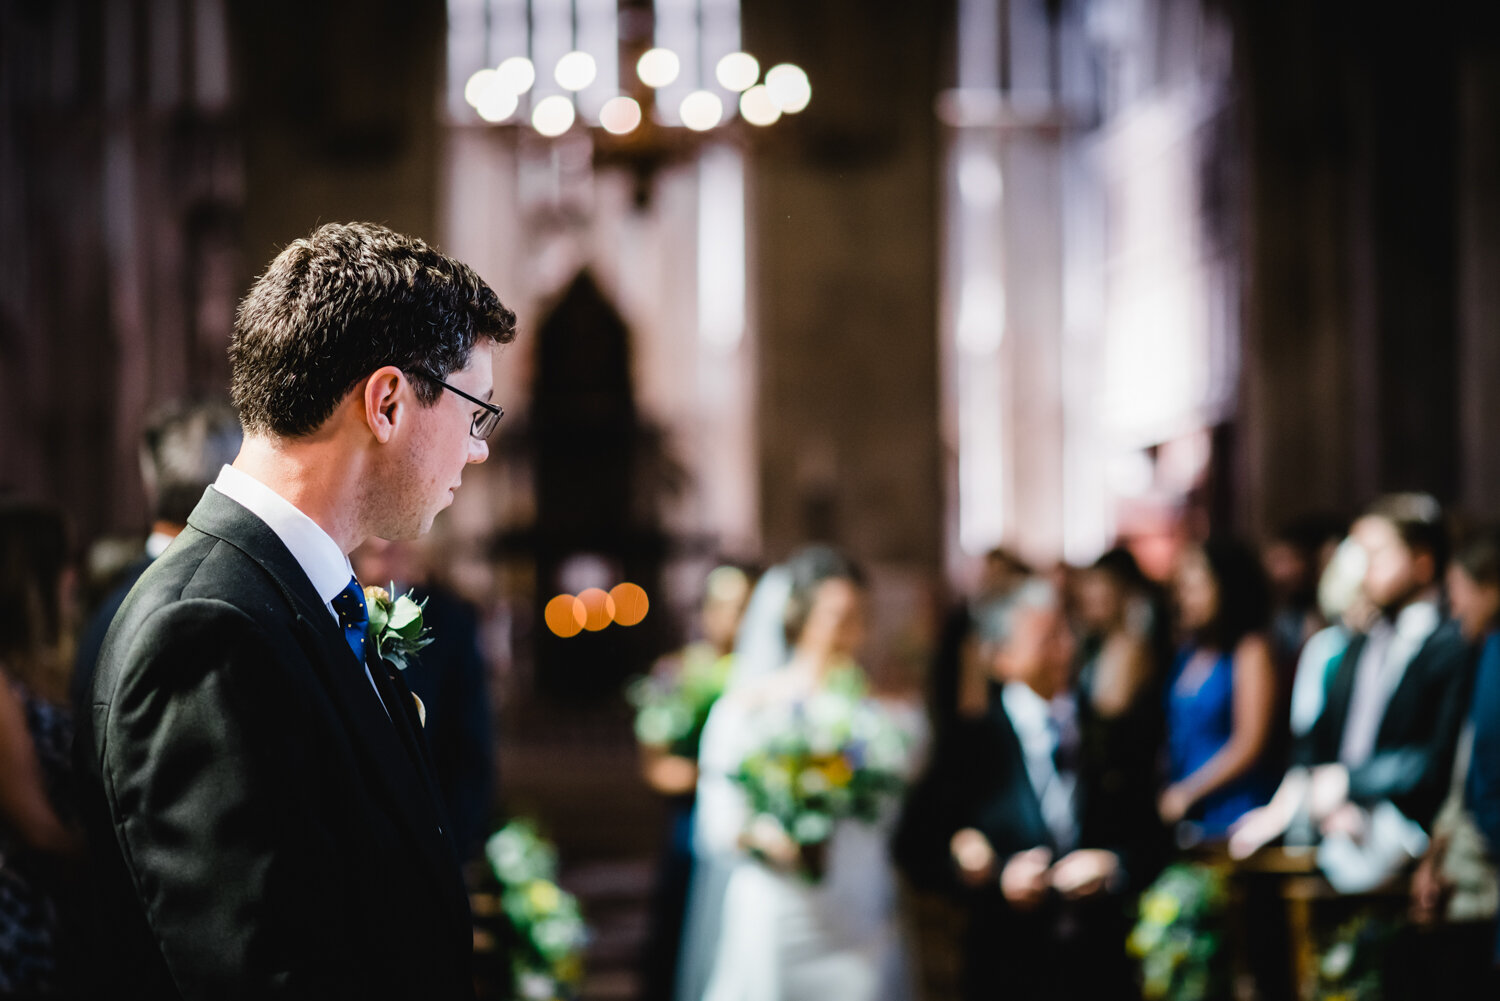 st-albans-cathedral-abbey-wedding-photos-pike-photography-126.jpg